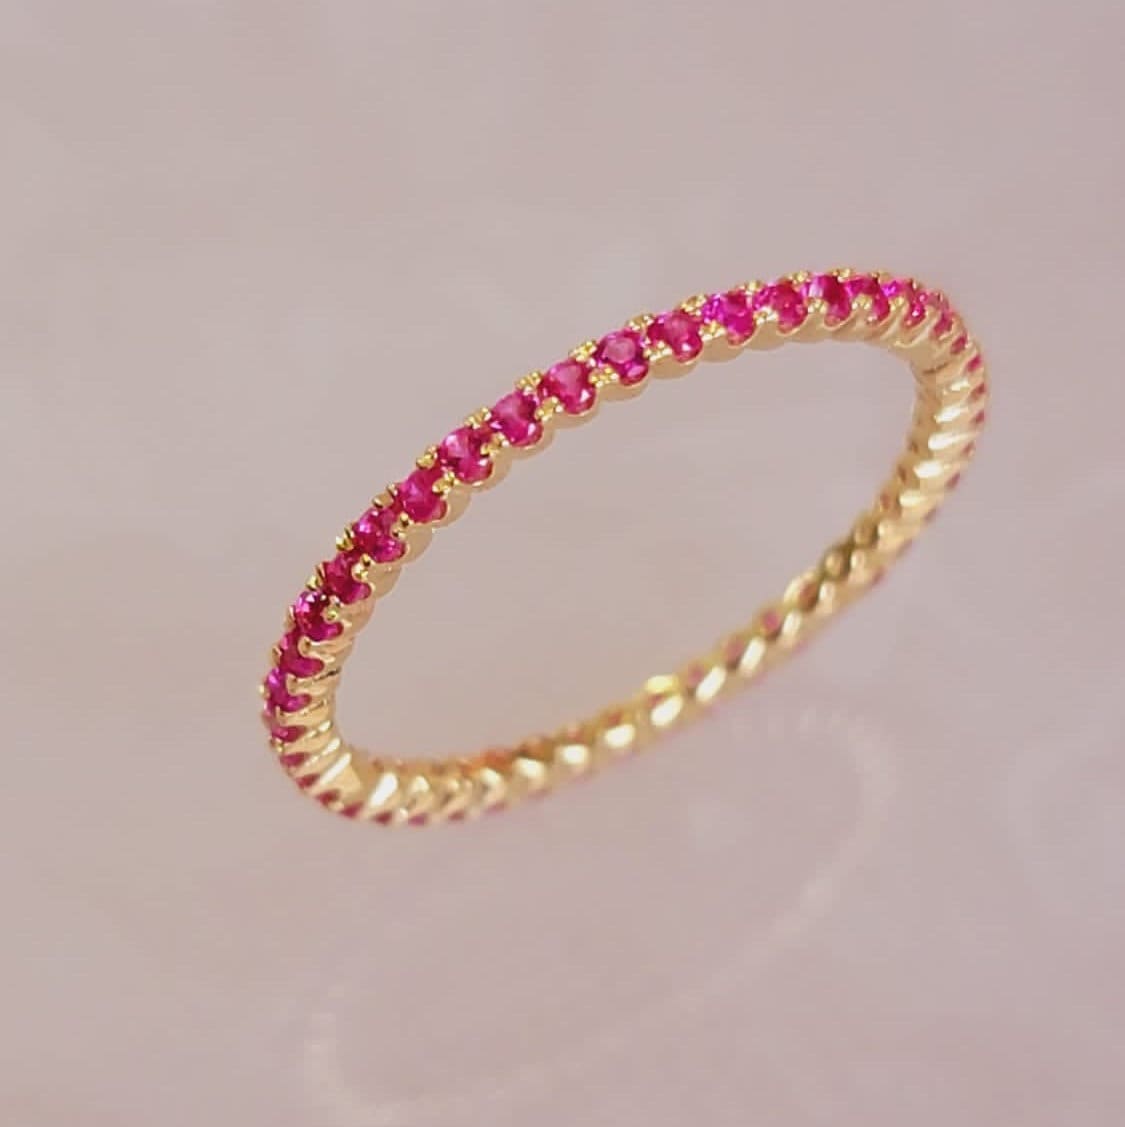 Natural Ruby Eternity Ring, 14K Solid Gold Eternity Band, Ruby Wedding Band, July Birthstone Band, Stackable Ring, Unique Wedding Band Women